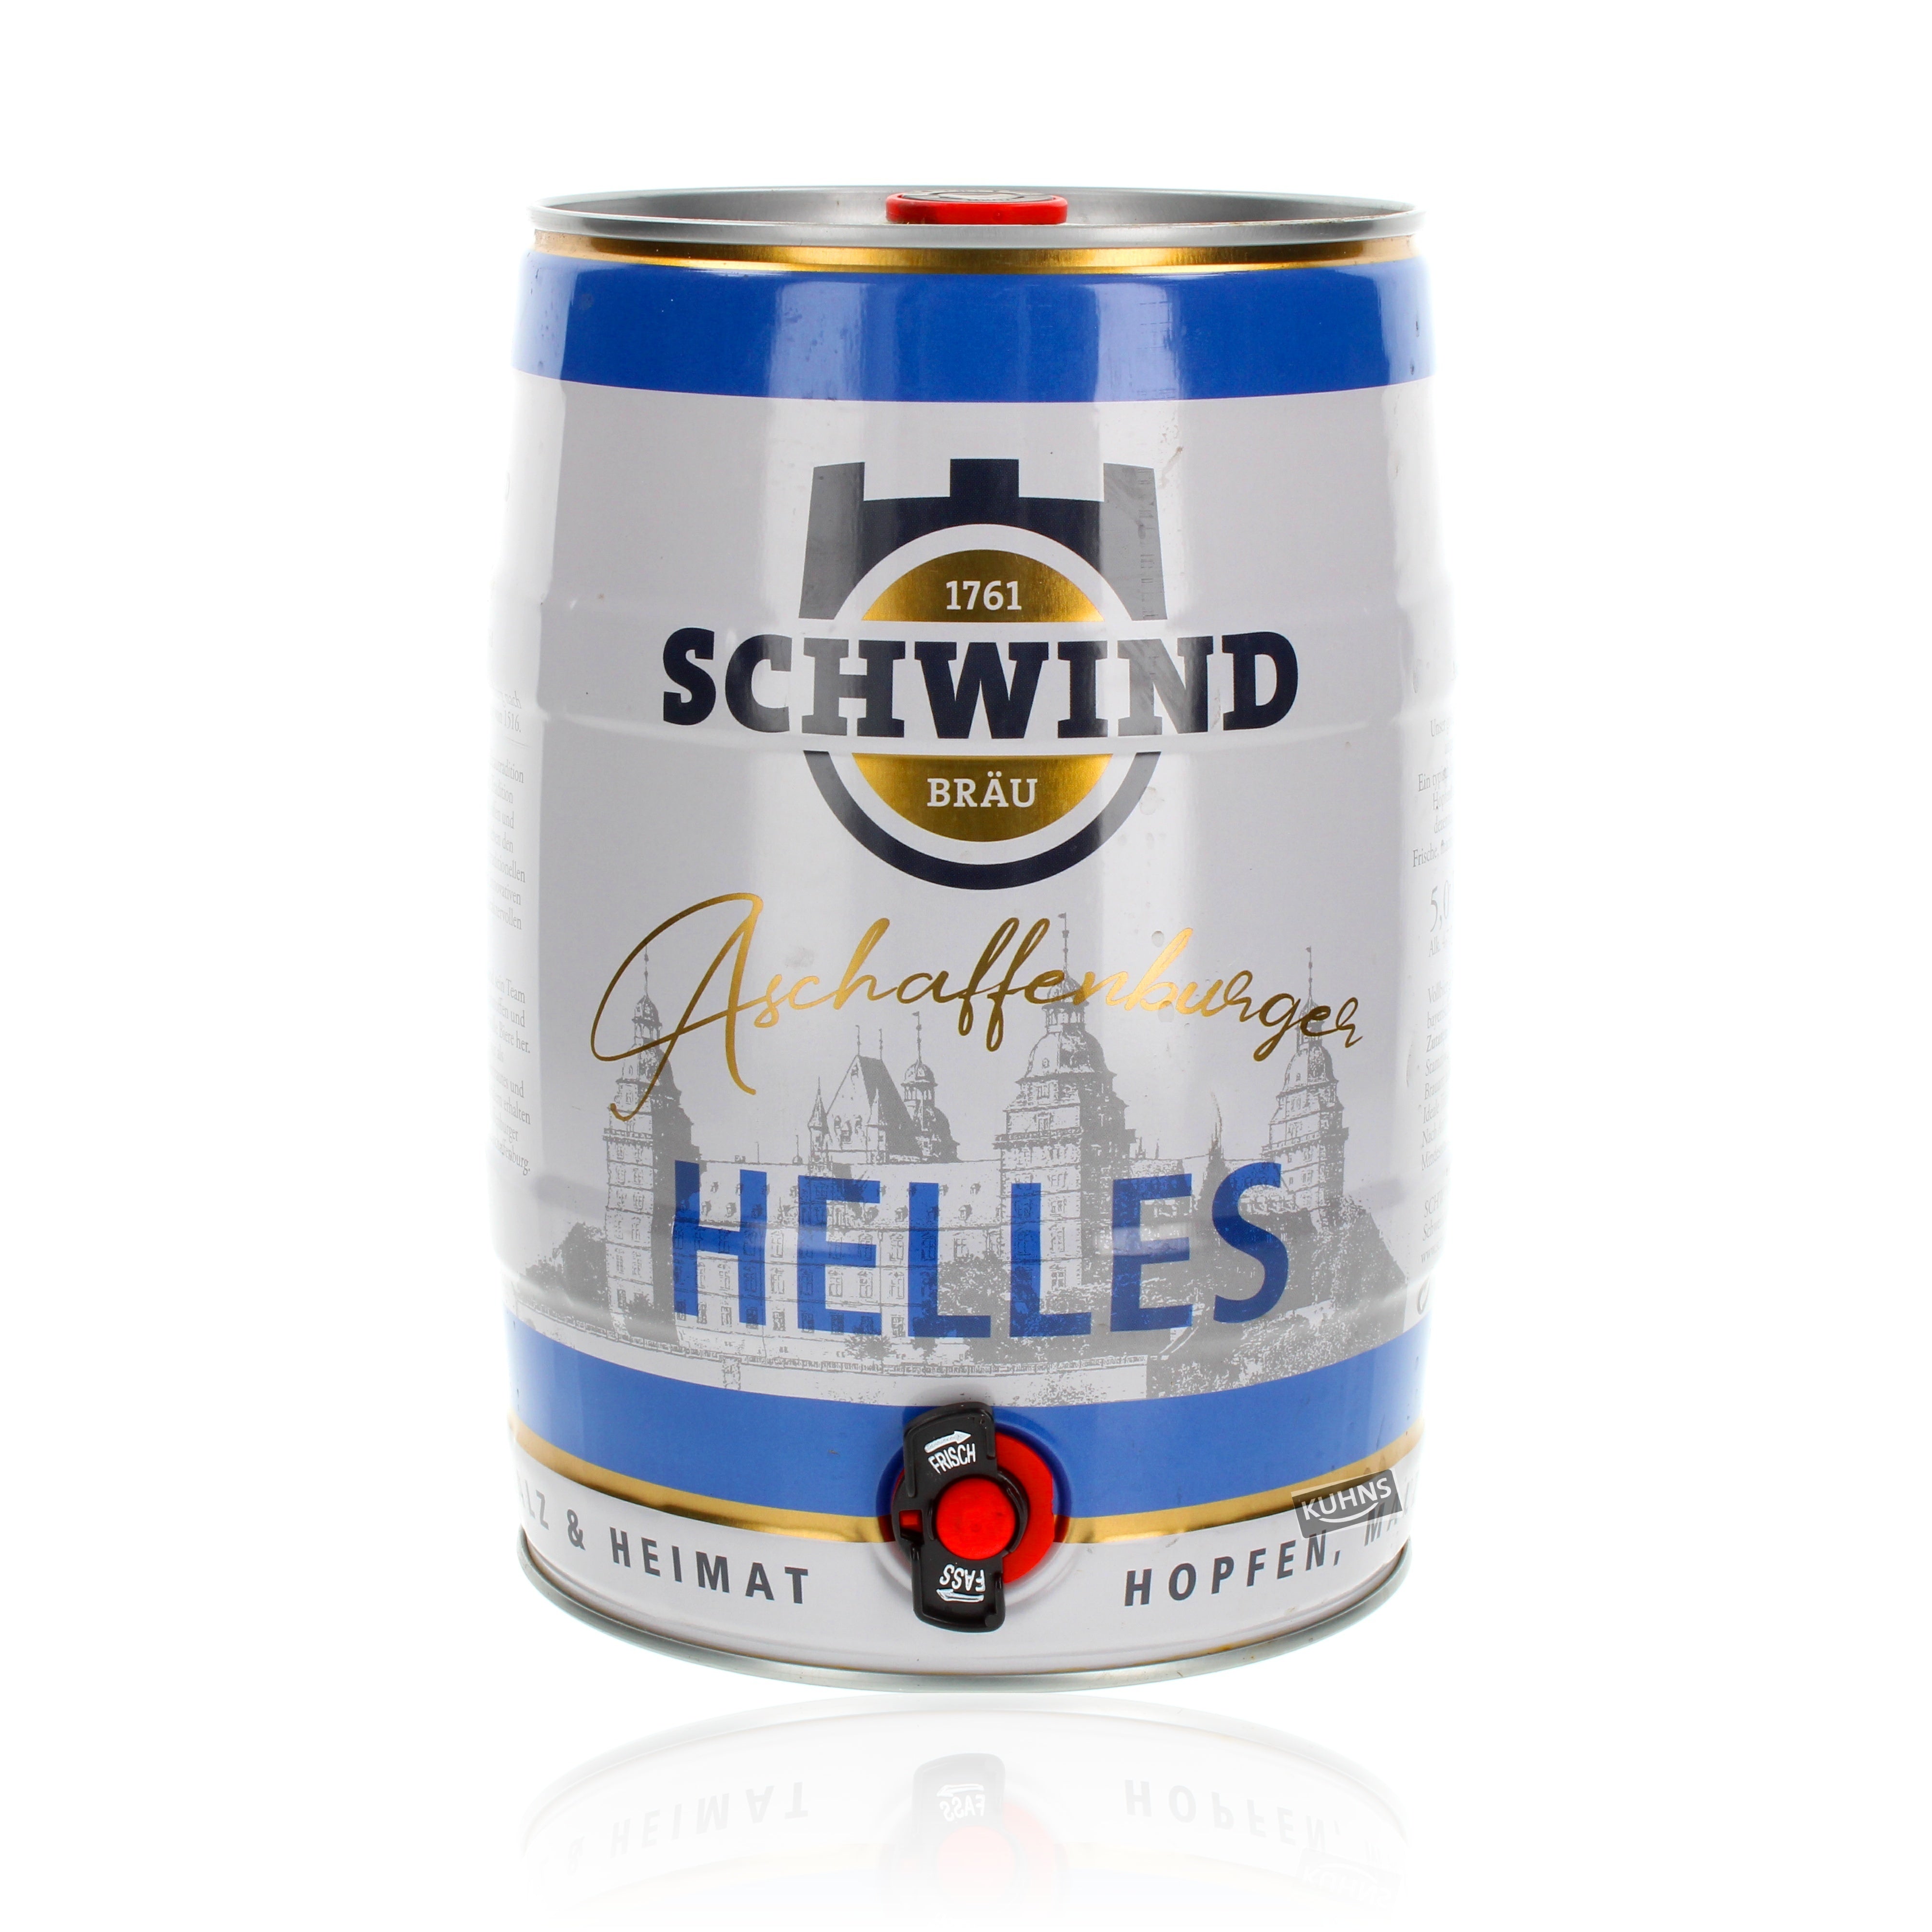 Schwind Bräu Helles party can 5l, alc. 4.7% by volume